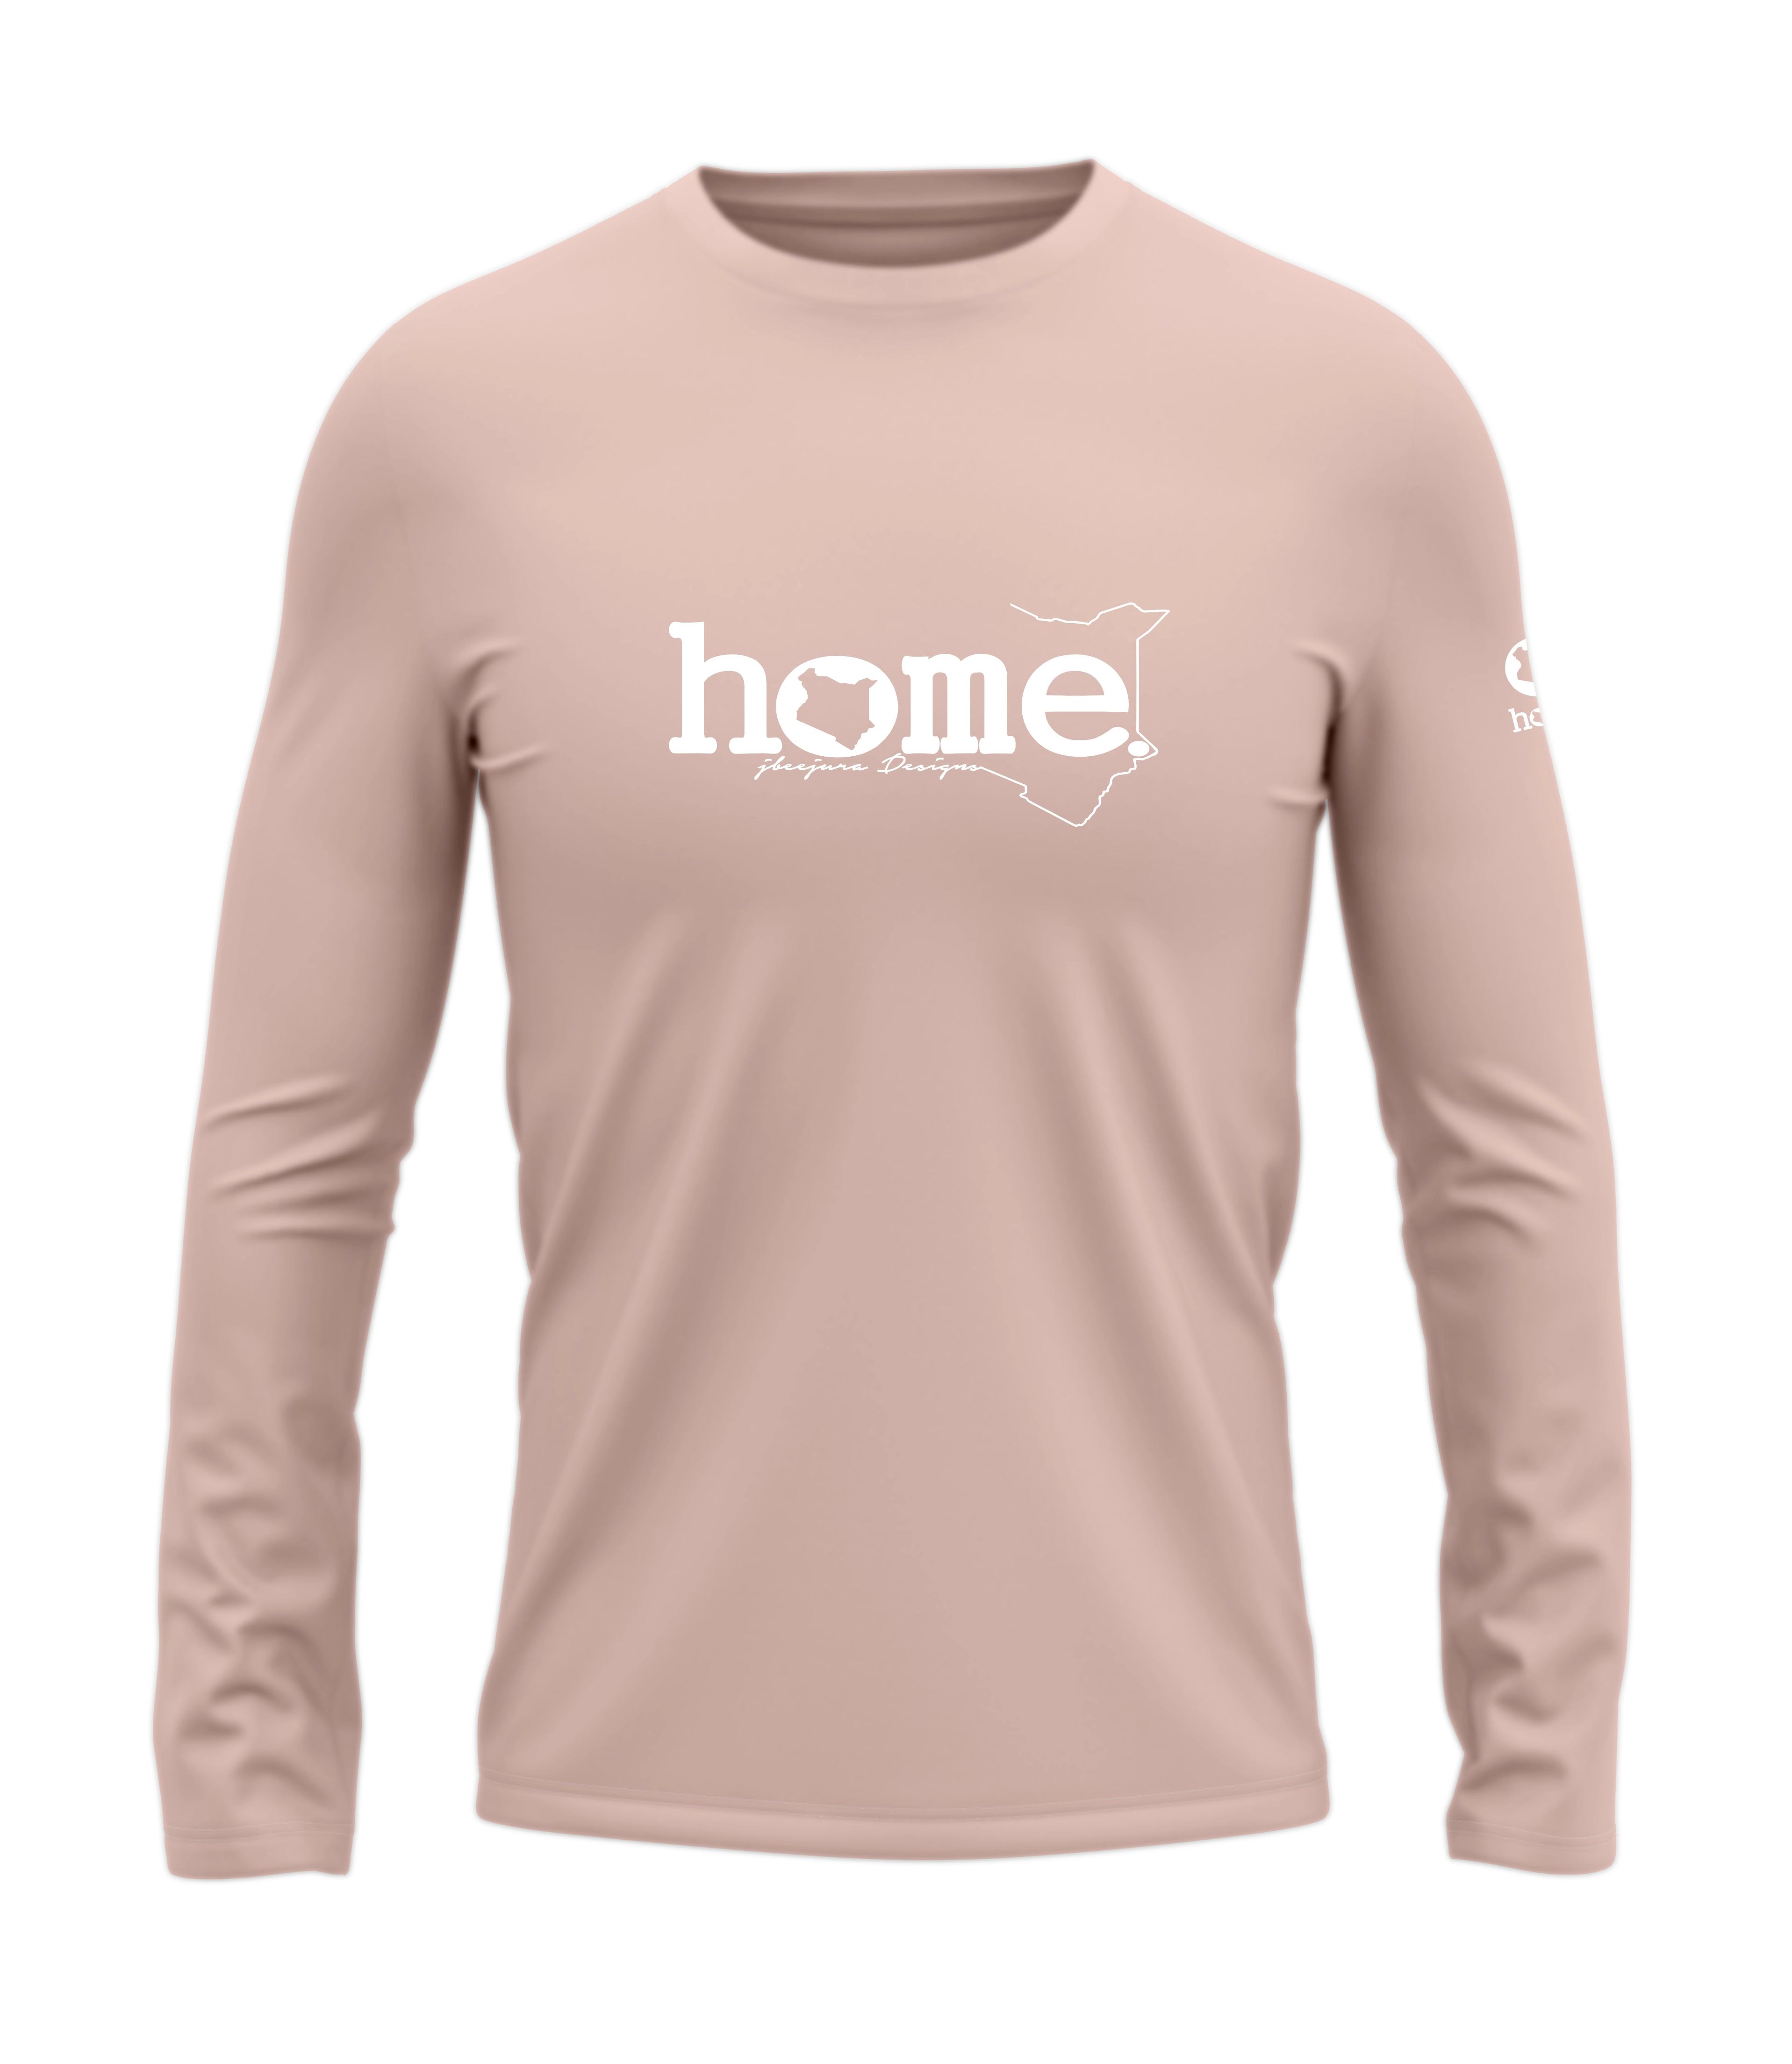 home_254 LONG-SLEEVED PEACH T-SHIRT WITH A WHITE CLASSIC WORDS PRINT – COTTON PLUS FABRIC